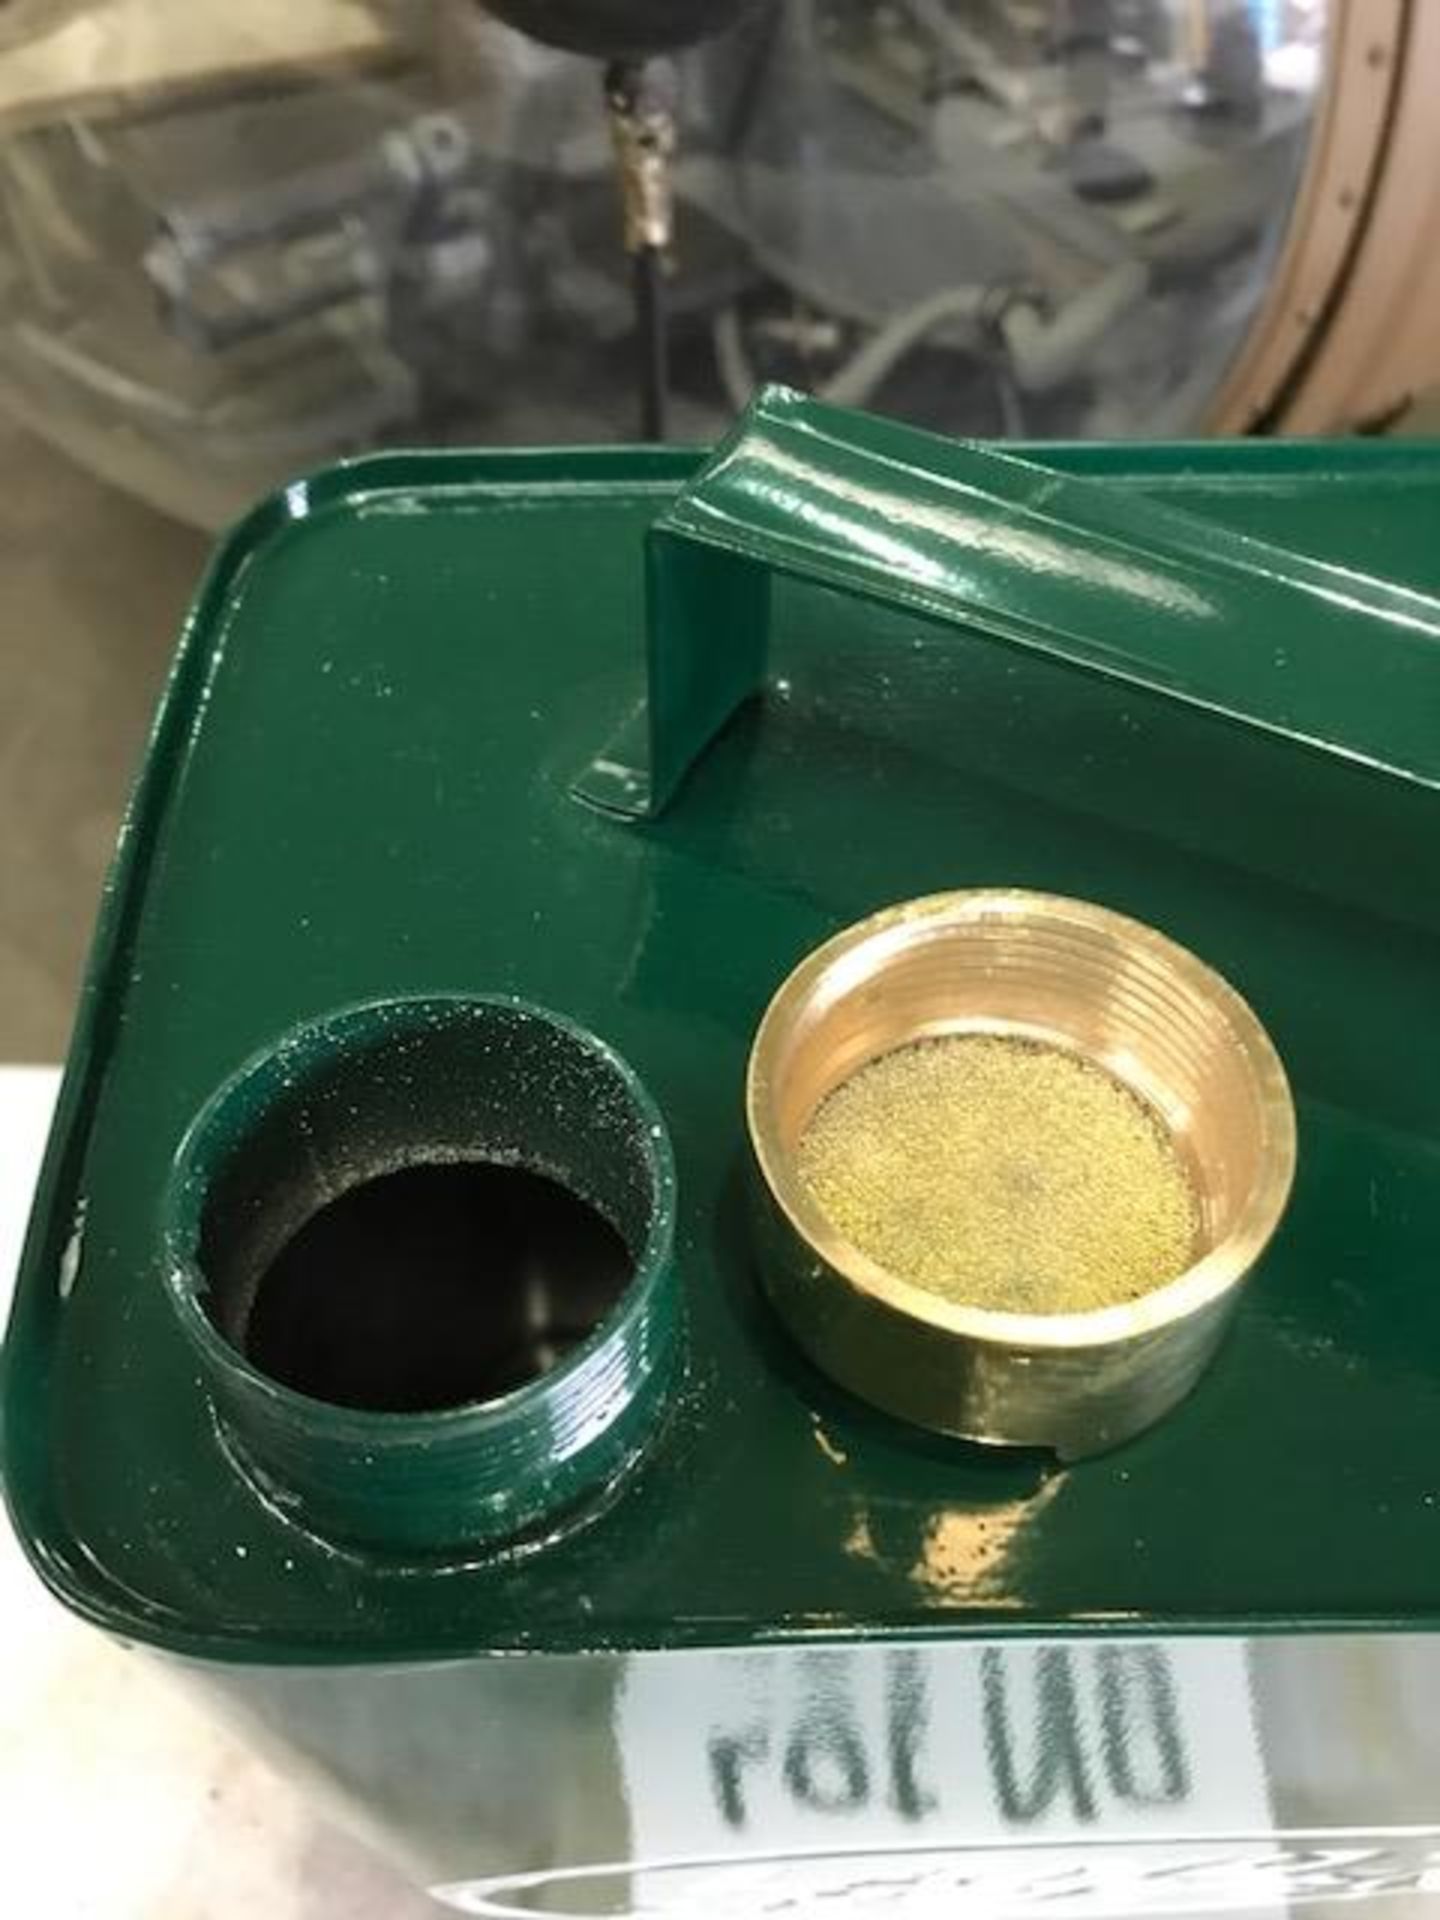 Vintage Style Land Rover Fuel Can with Brass Cap - Image 2 of 3